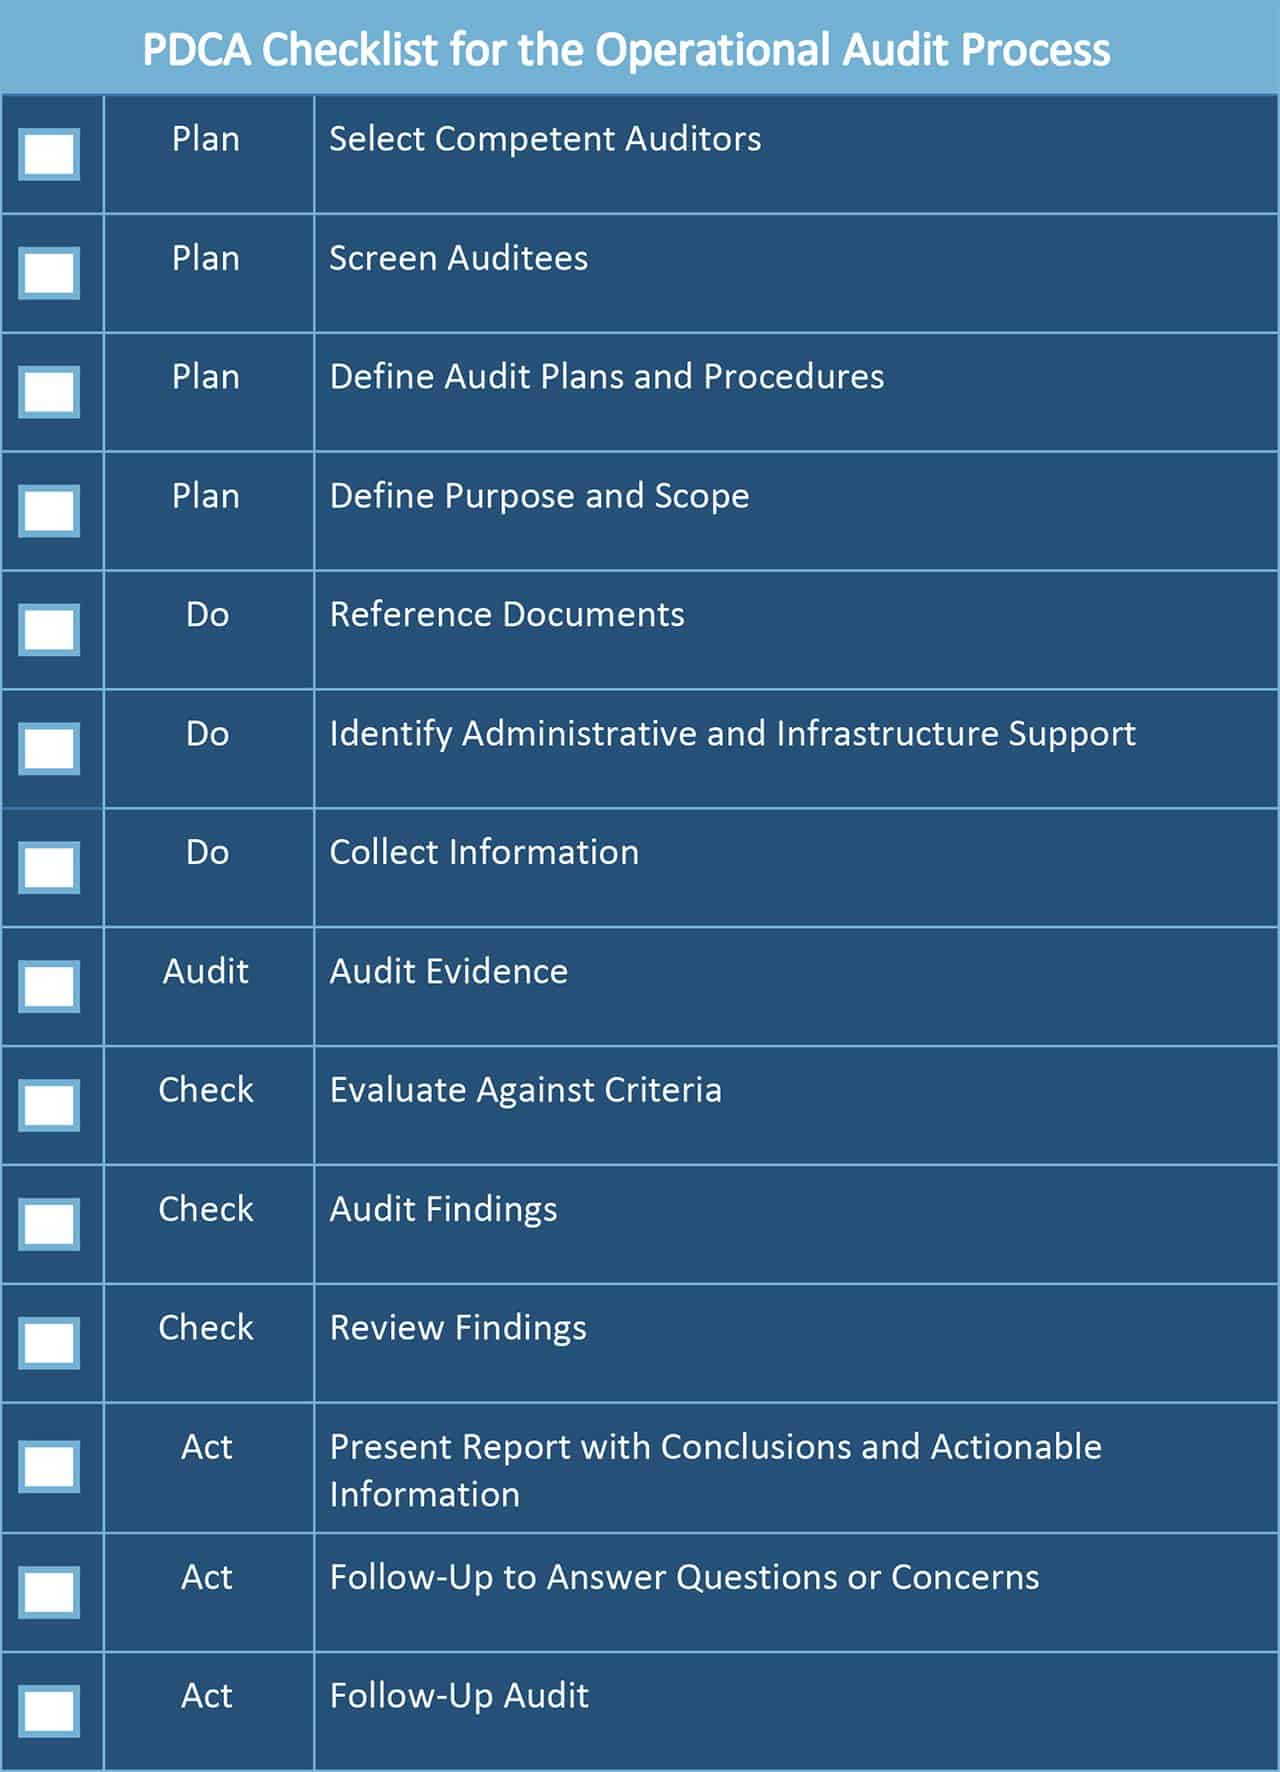 PDCA Checklist for Operational Audit Process